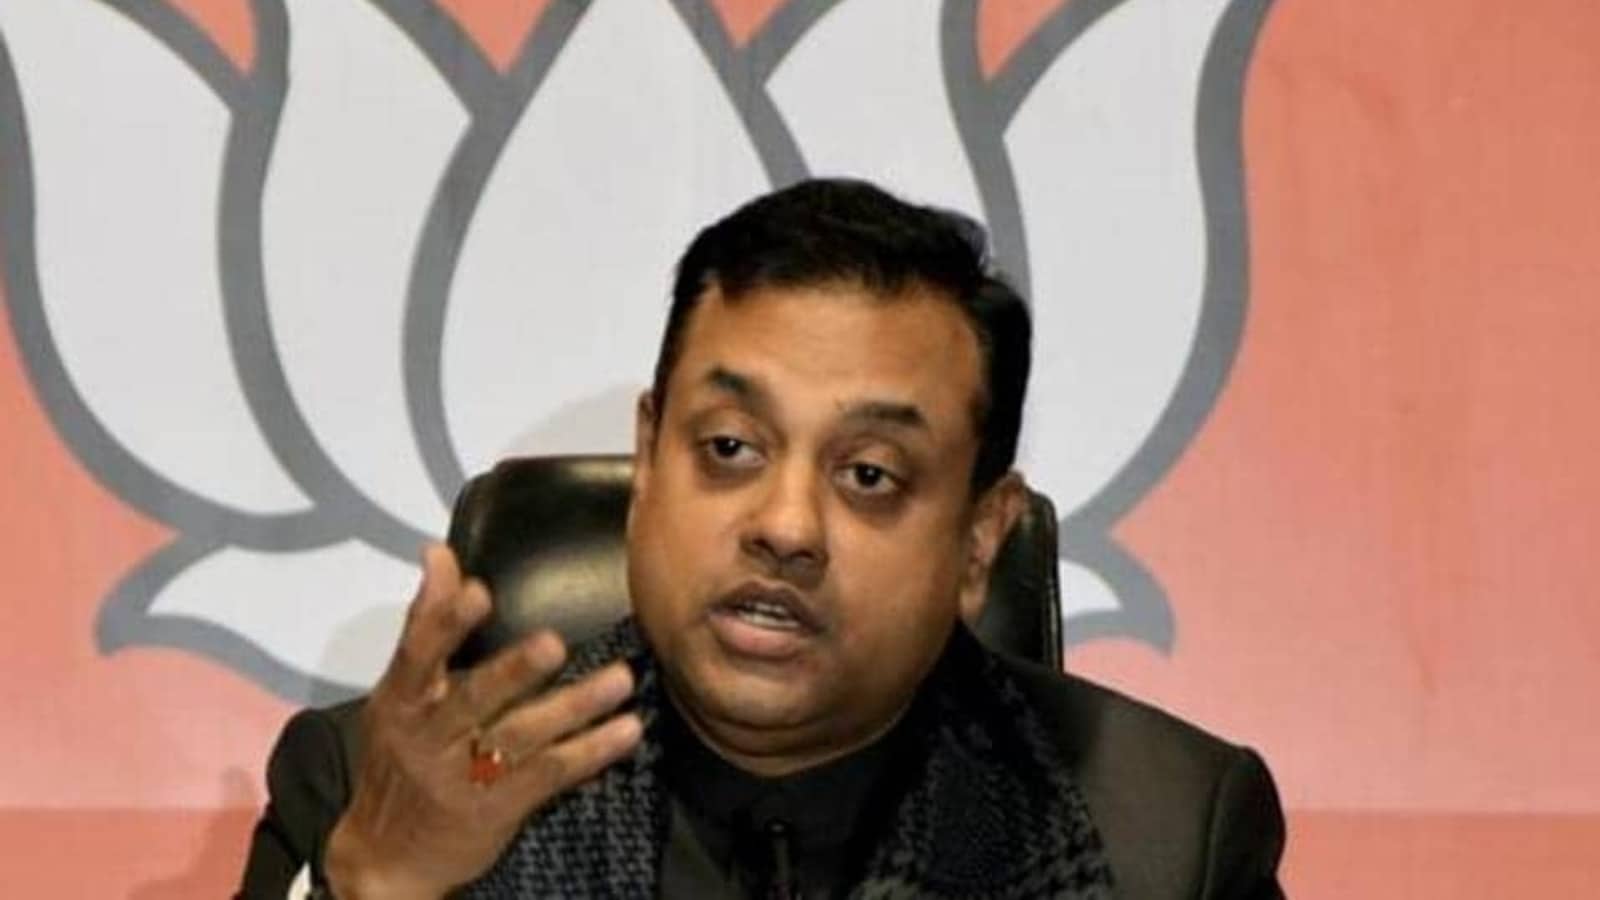 On Covd toll, BJP’s Sambit Patra says WHO data and Cong ‘beta’ are both wrong